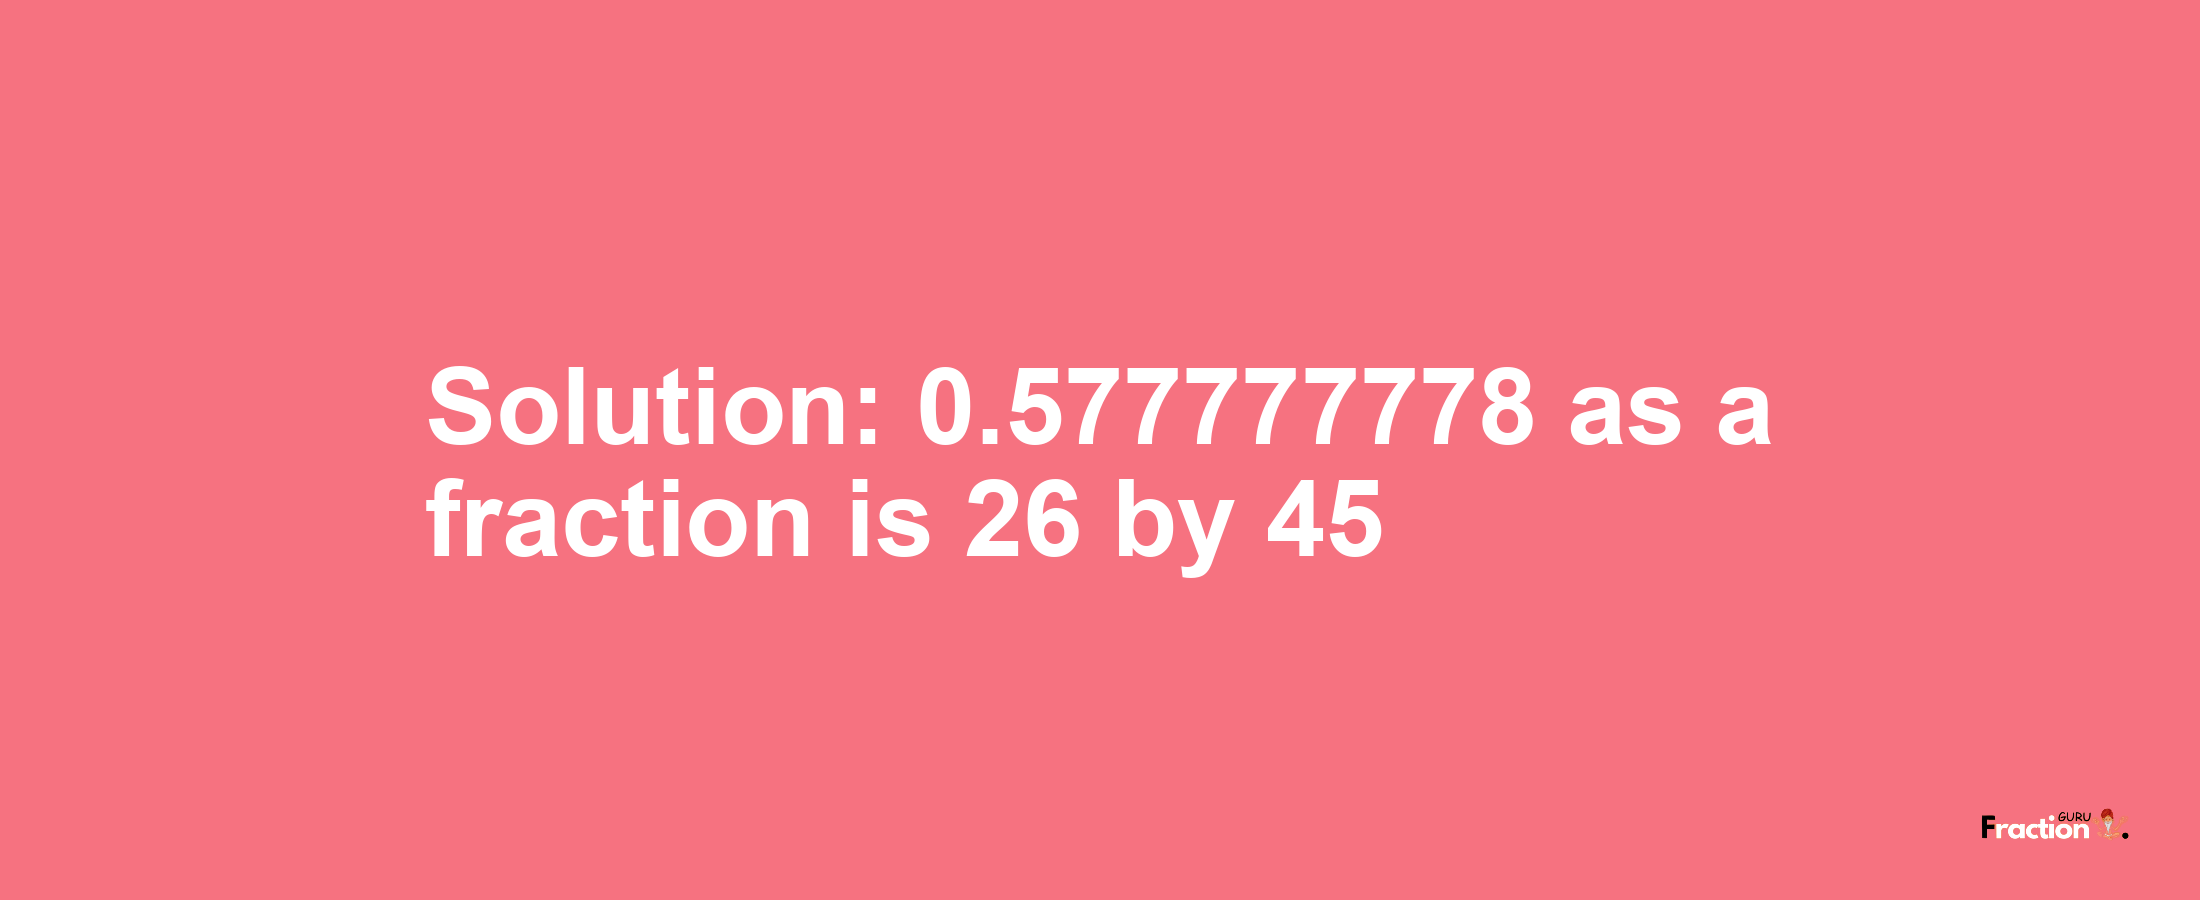 Solution:0.577777778 as a fraction is 26/45